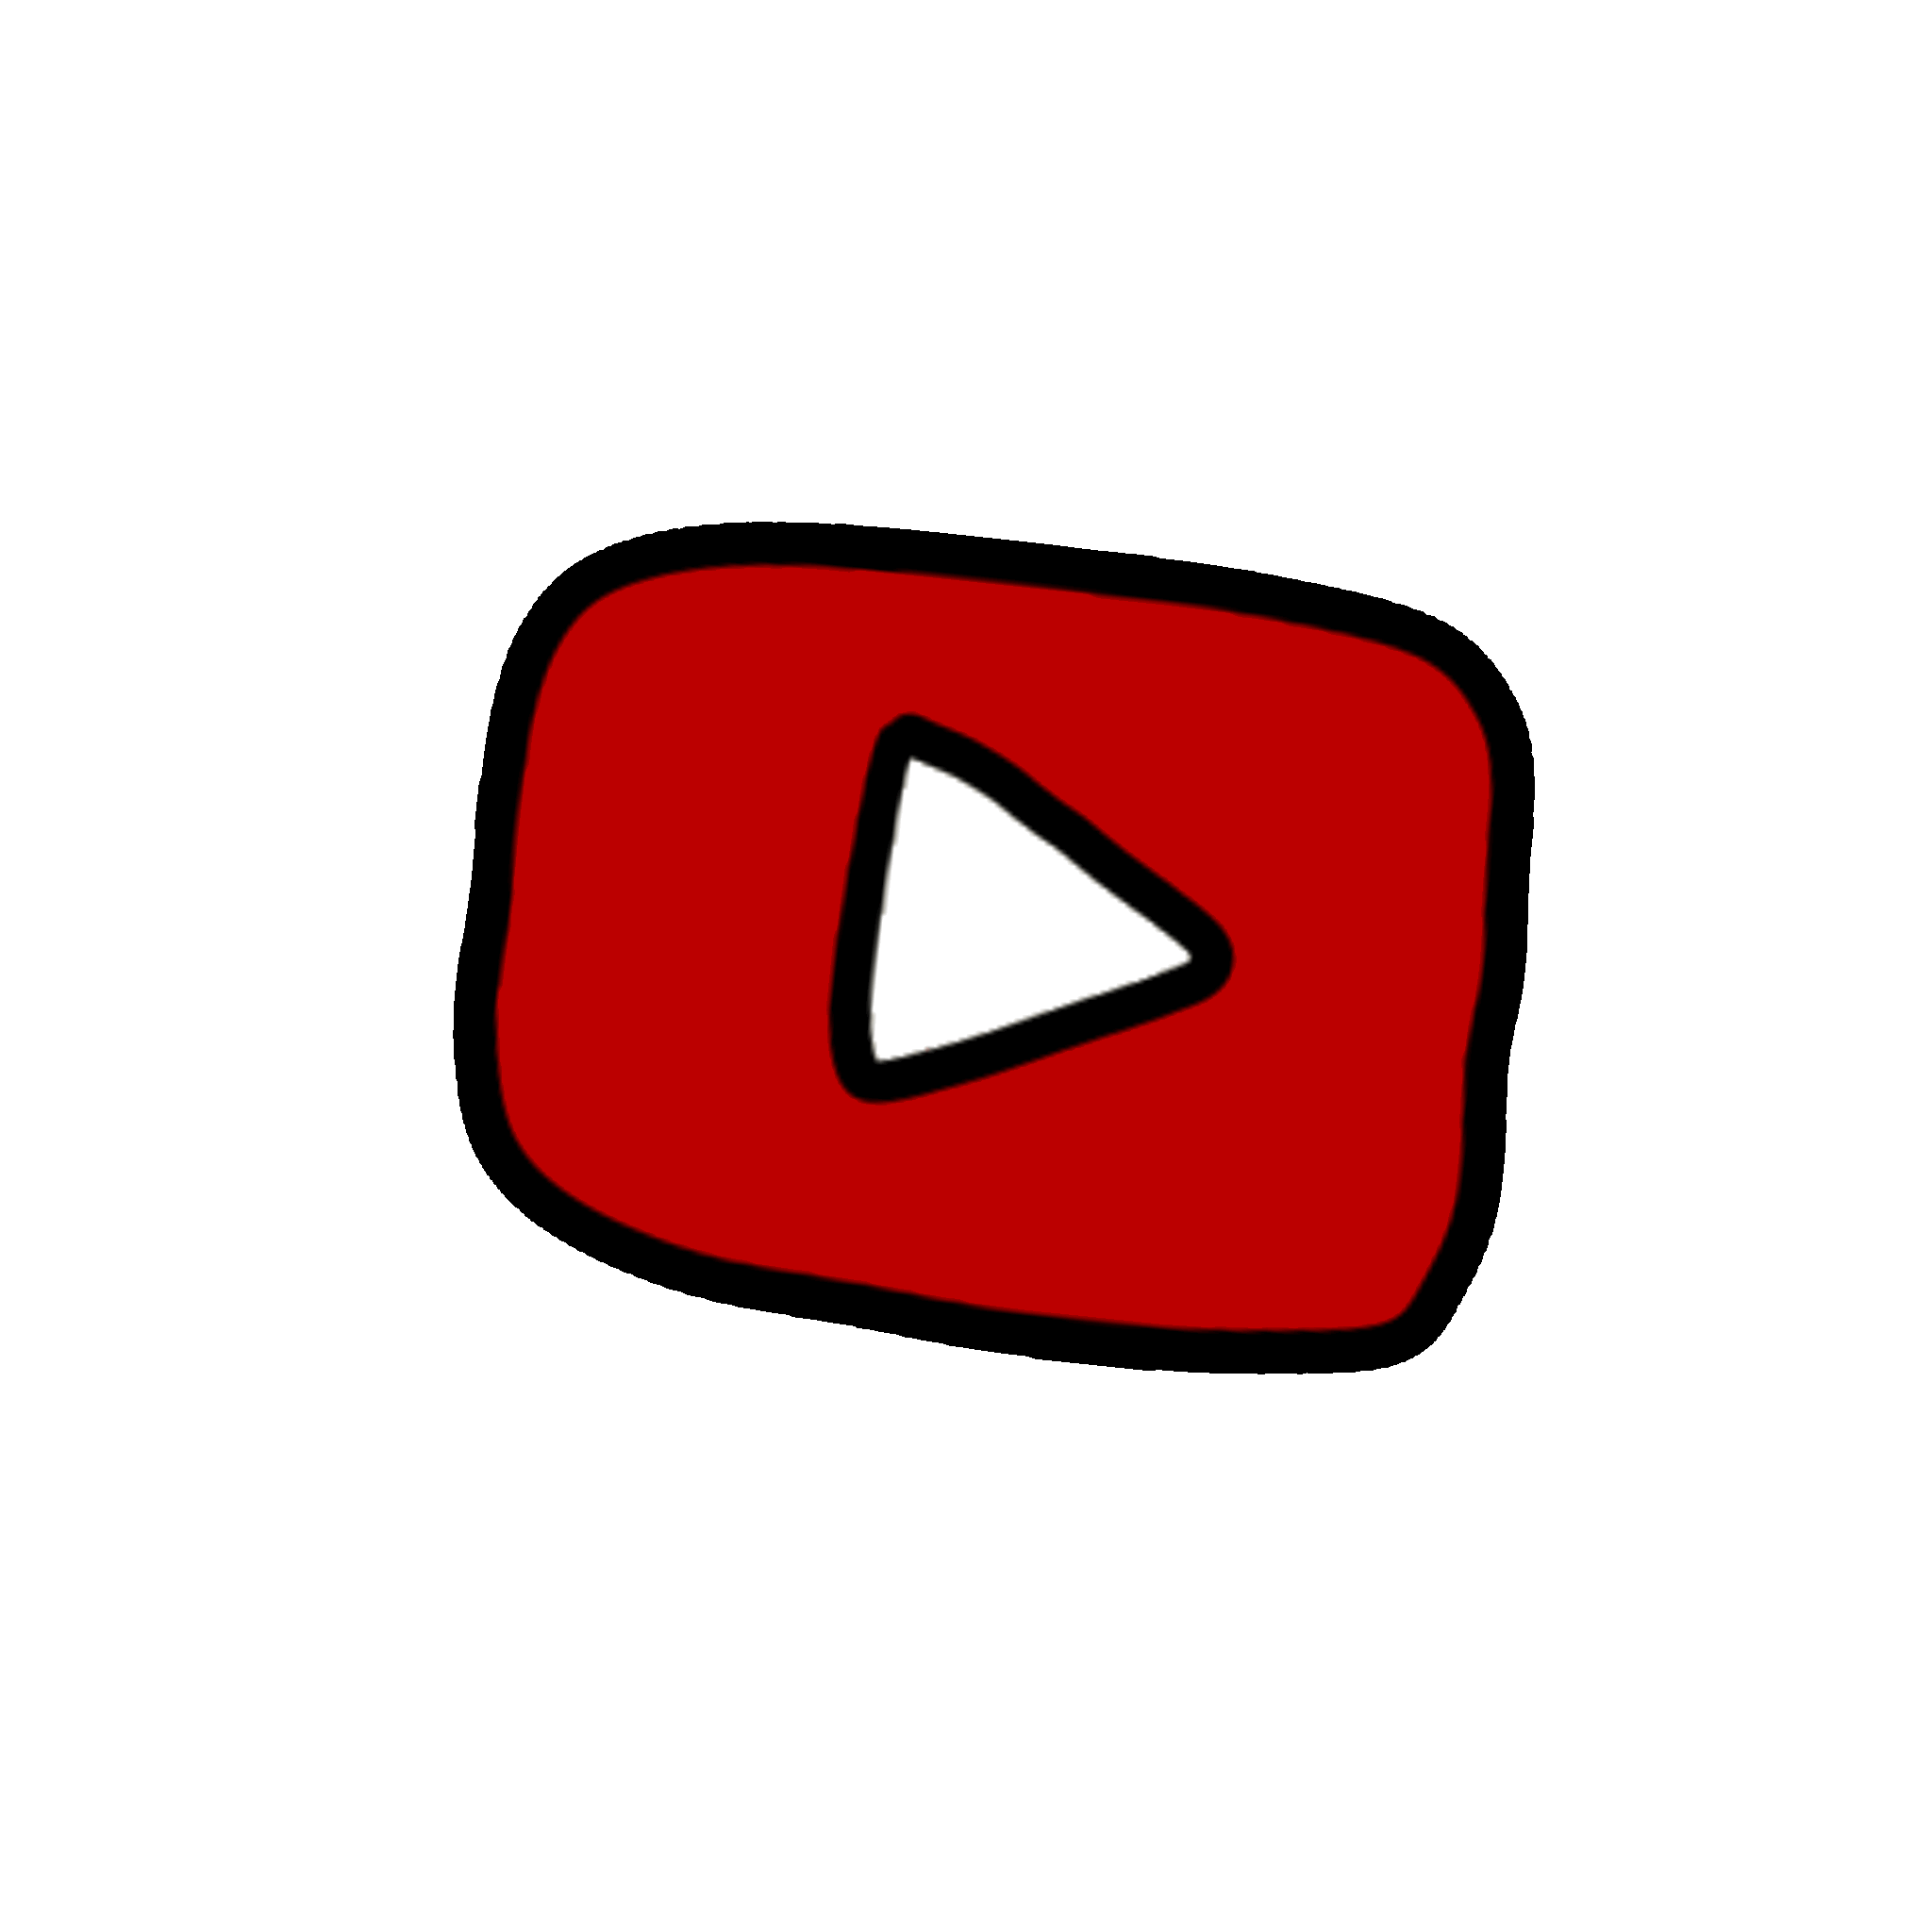 Youtube Logo Sticker for iOS & Android.